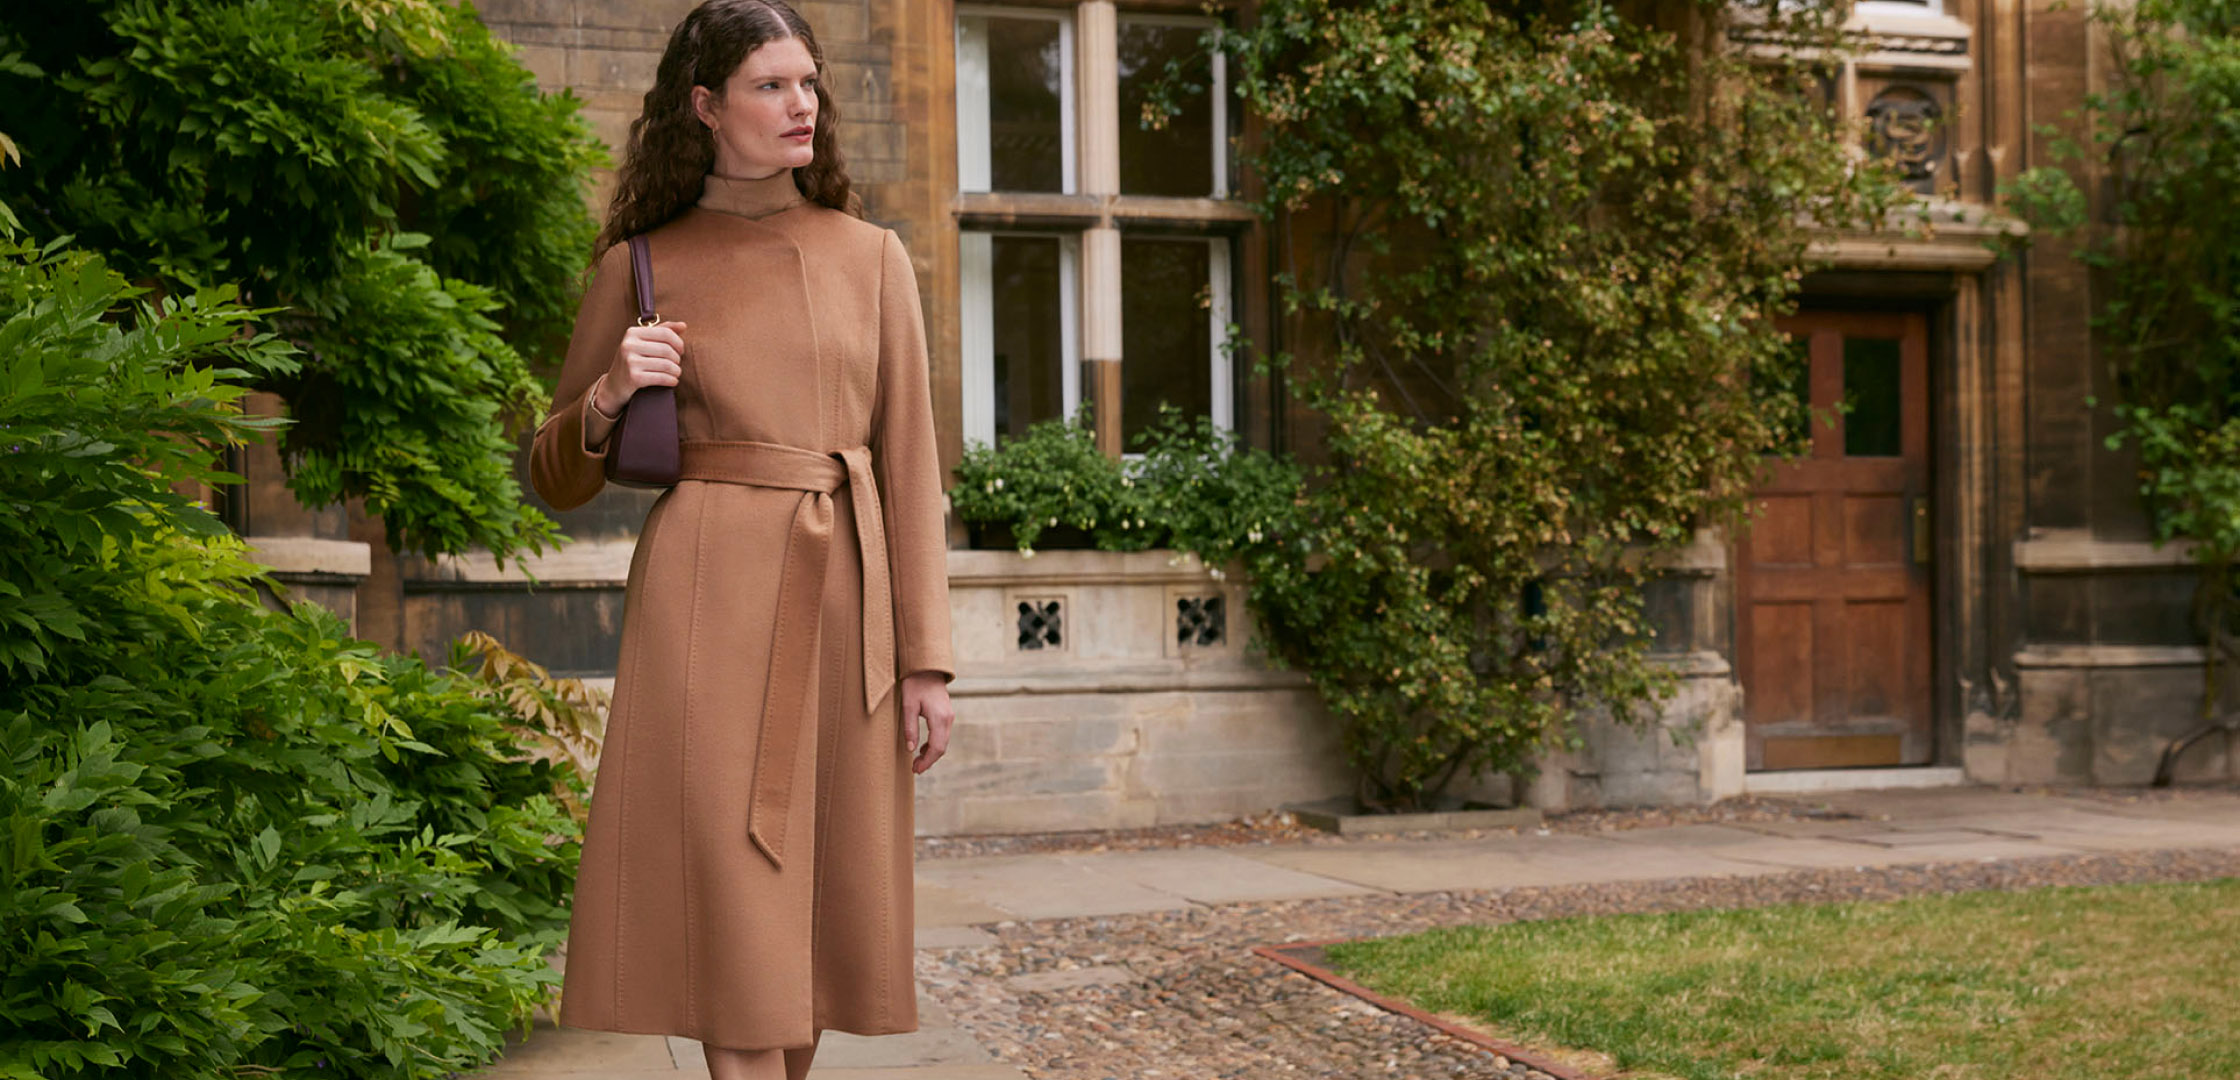 Model photographed walking by a historic building wearing a camel wool coat.